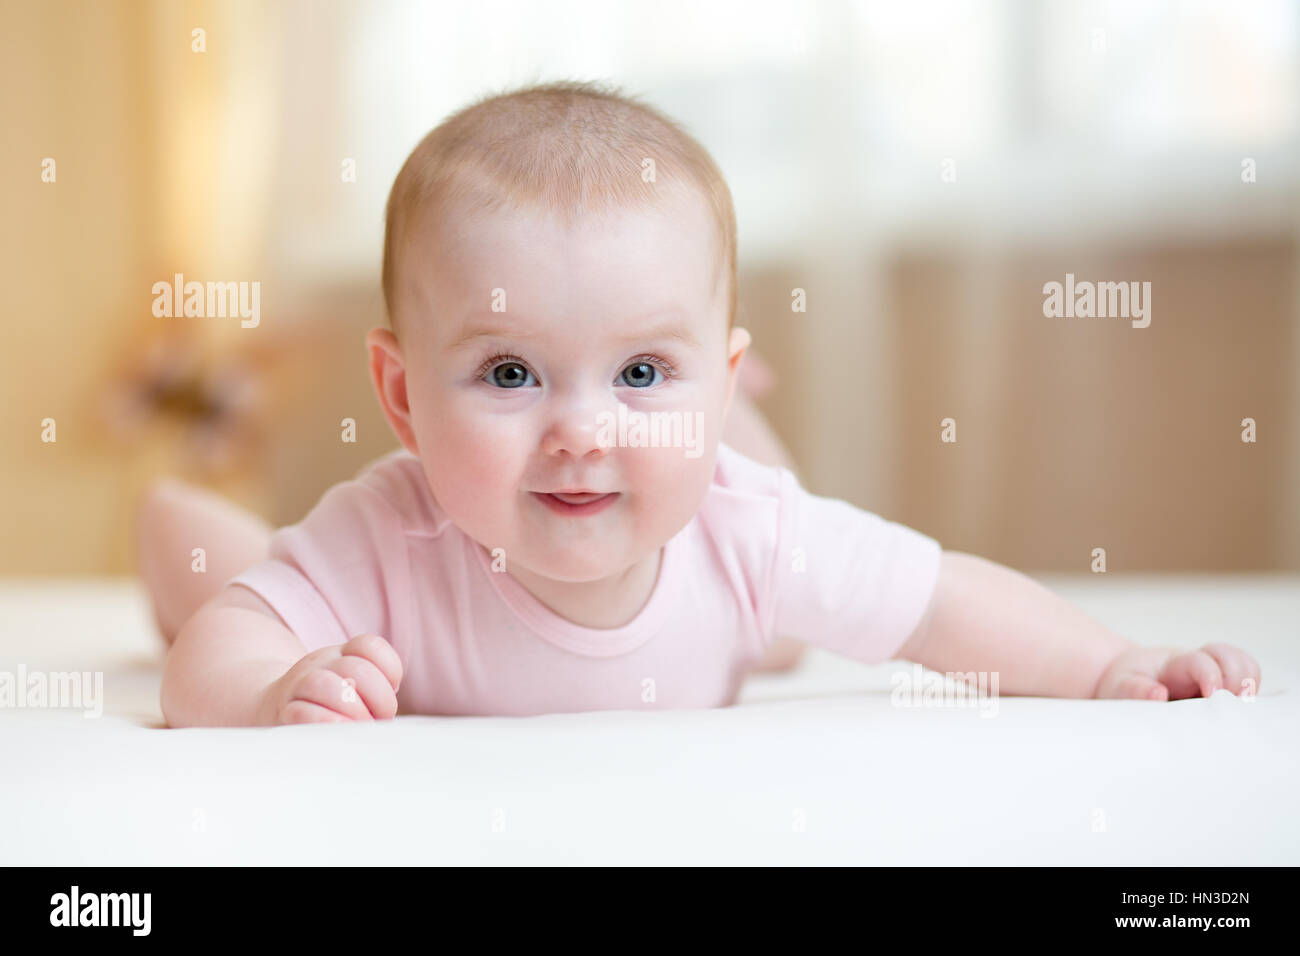 Cute baby wearing lying on tummy in bedroom Stock Photo